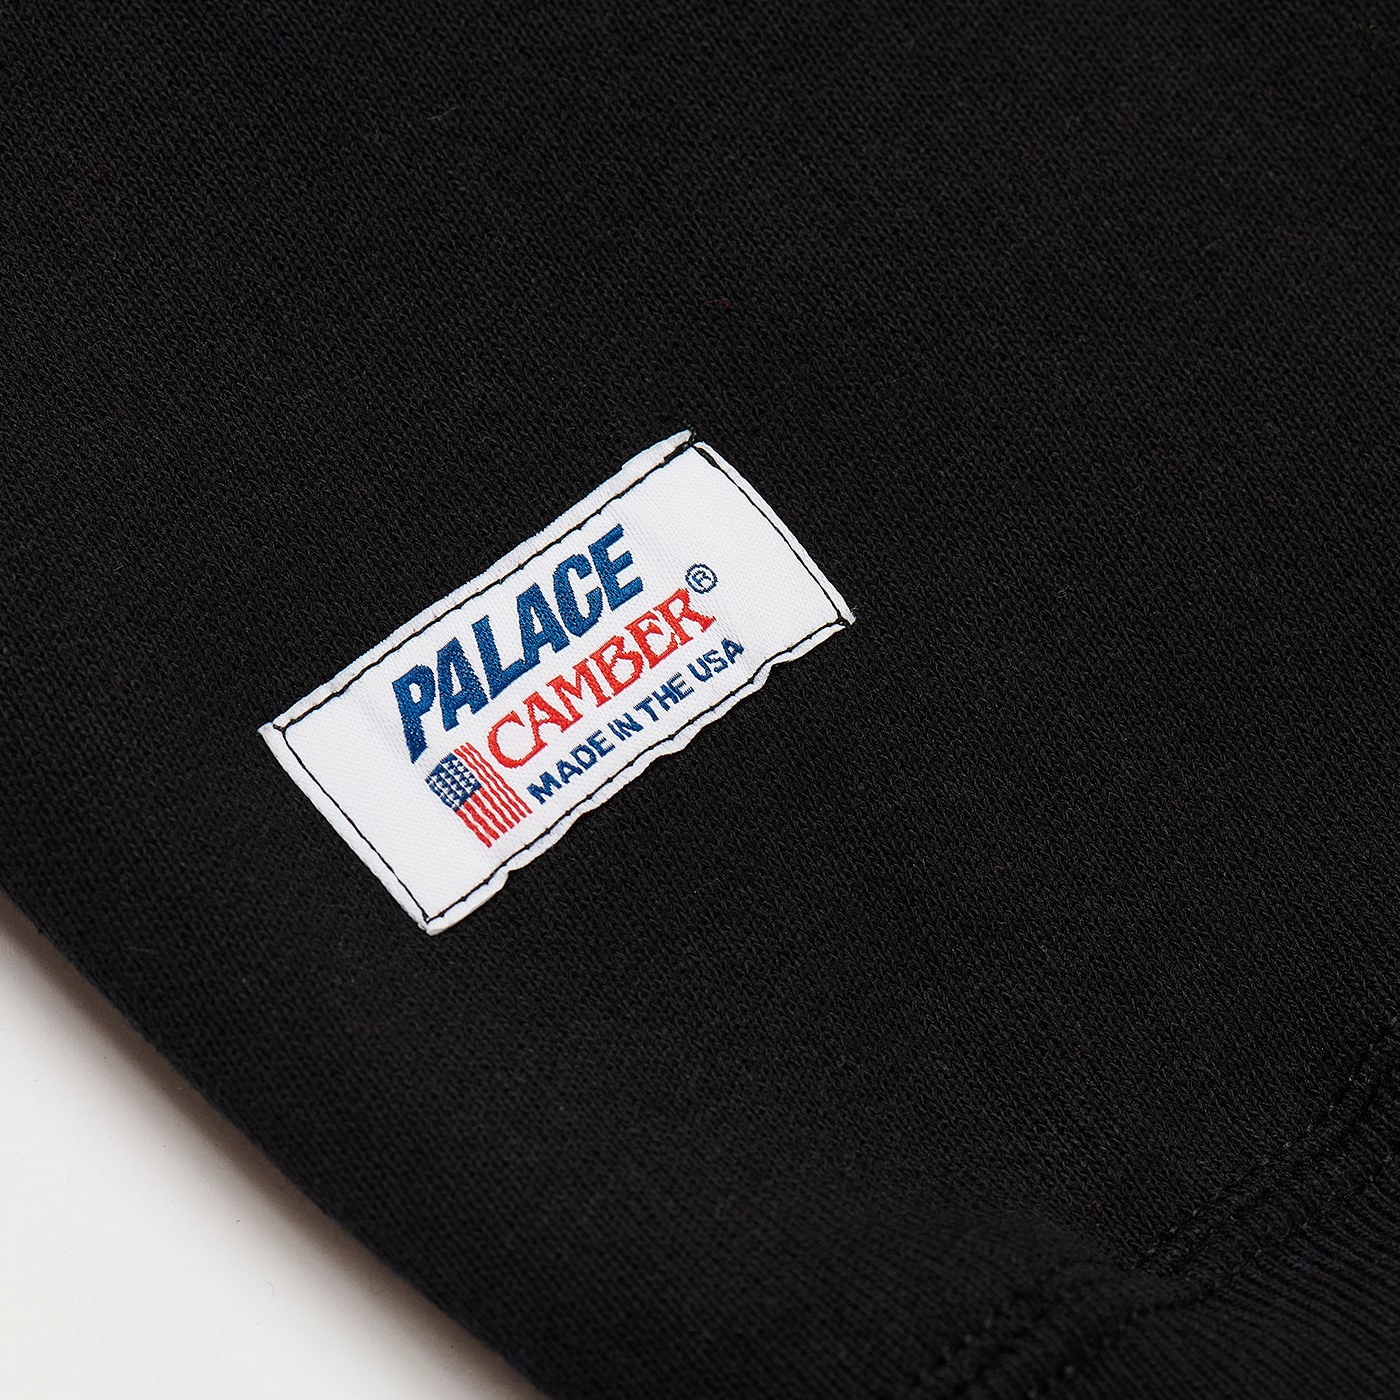 Thumbnail PALACE CAMBER HOOD BLACK one color